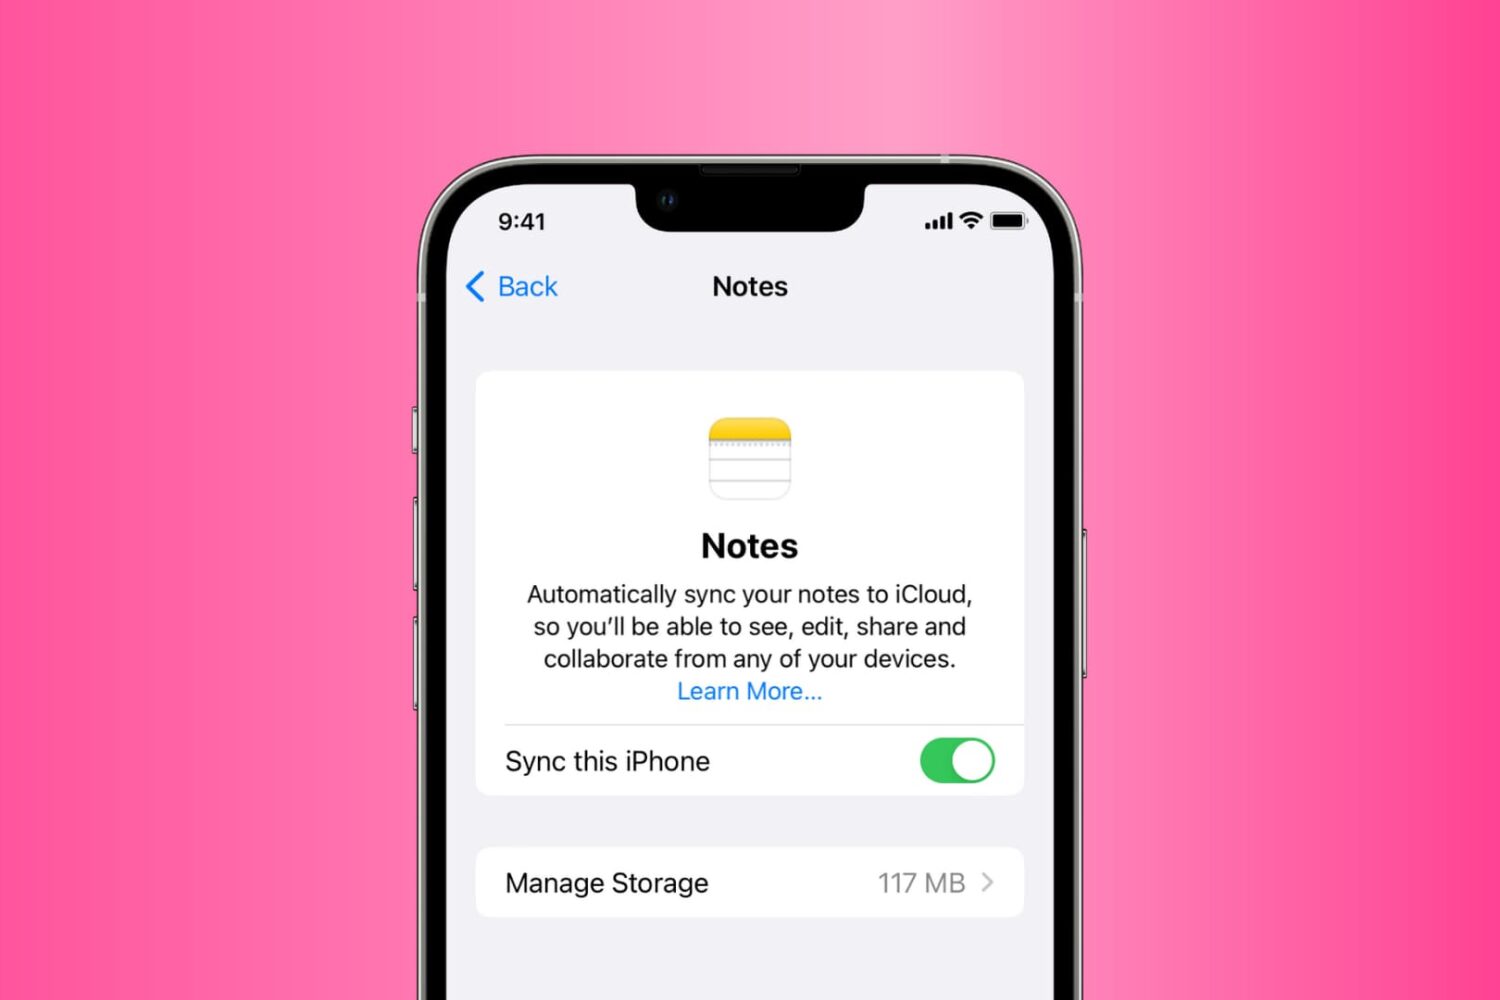 Sync iCloud Notes on your iPhone